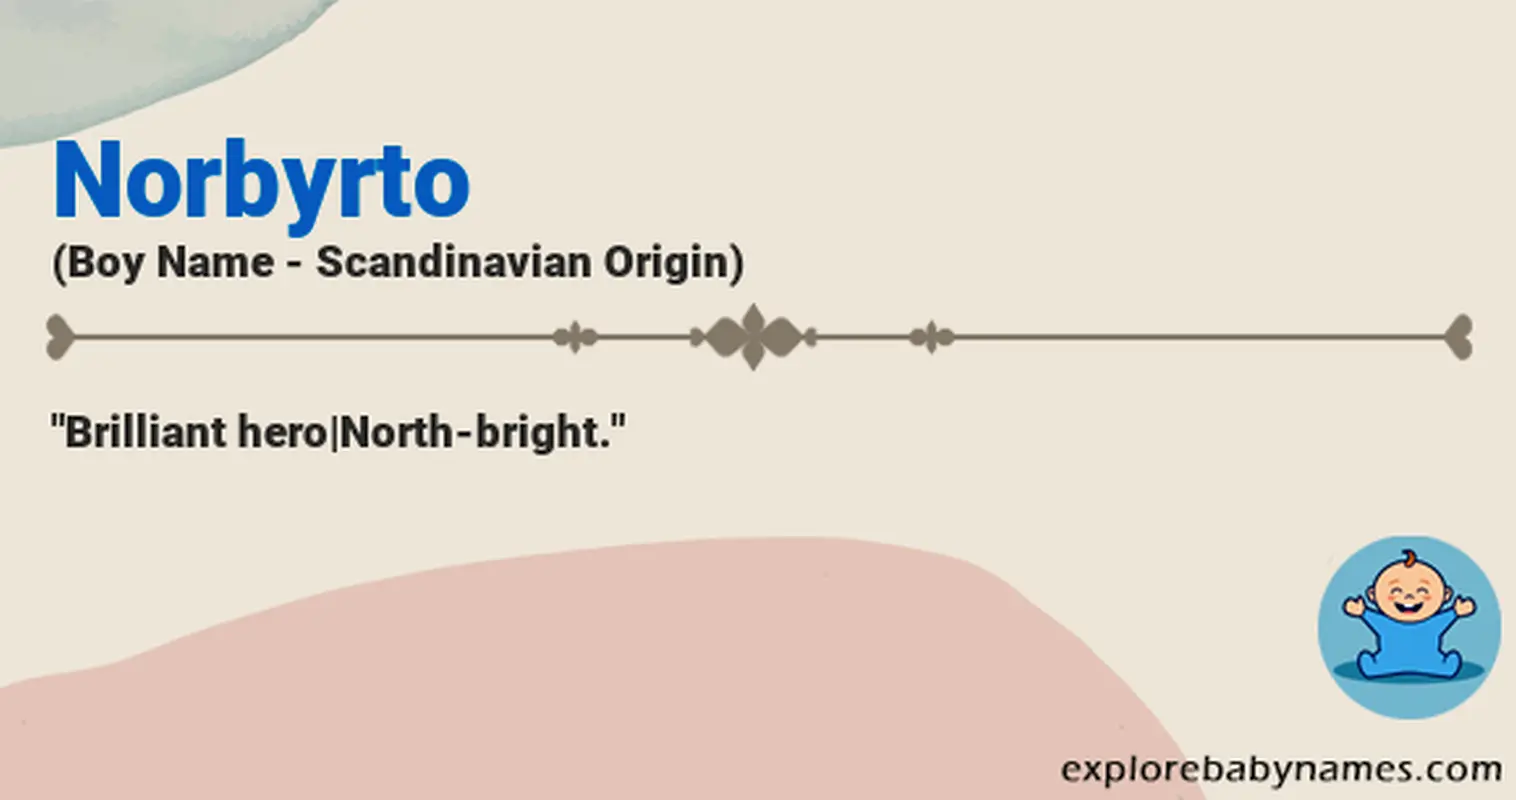 Meaning of Norbyrto